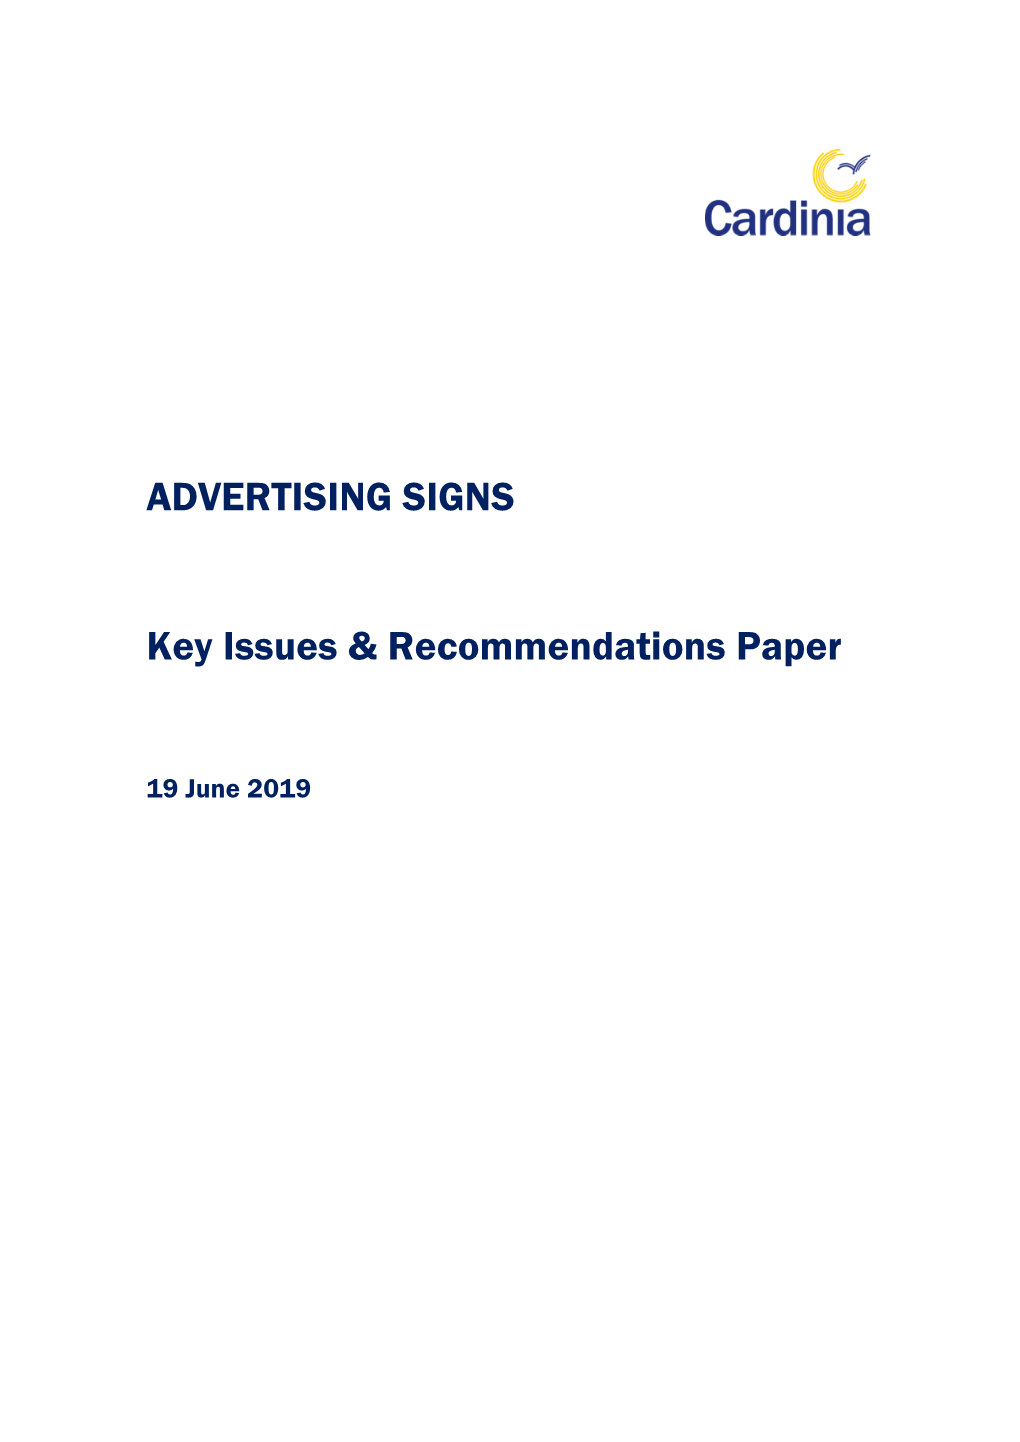 ADVERTISING SIGNS Key Issues & Recommendations Paper